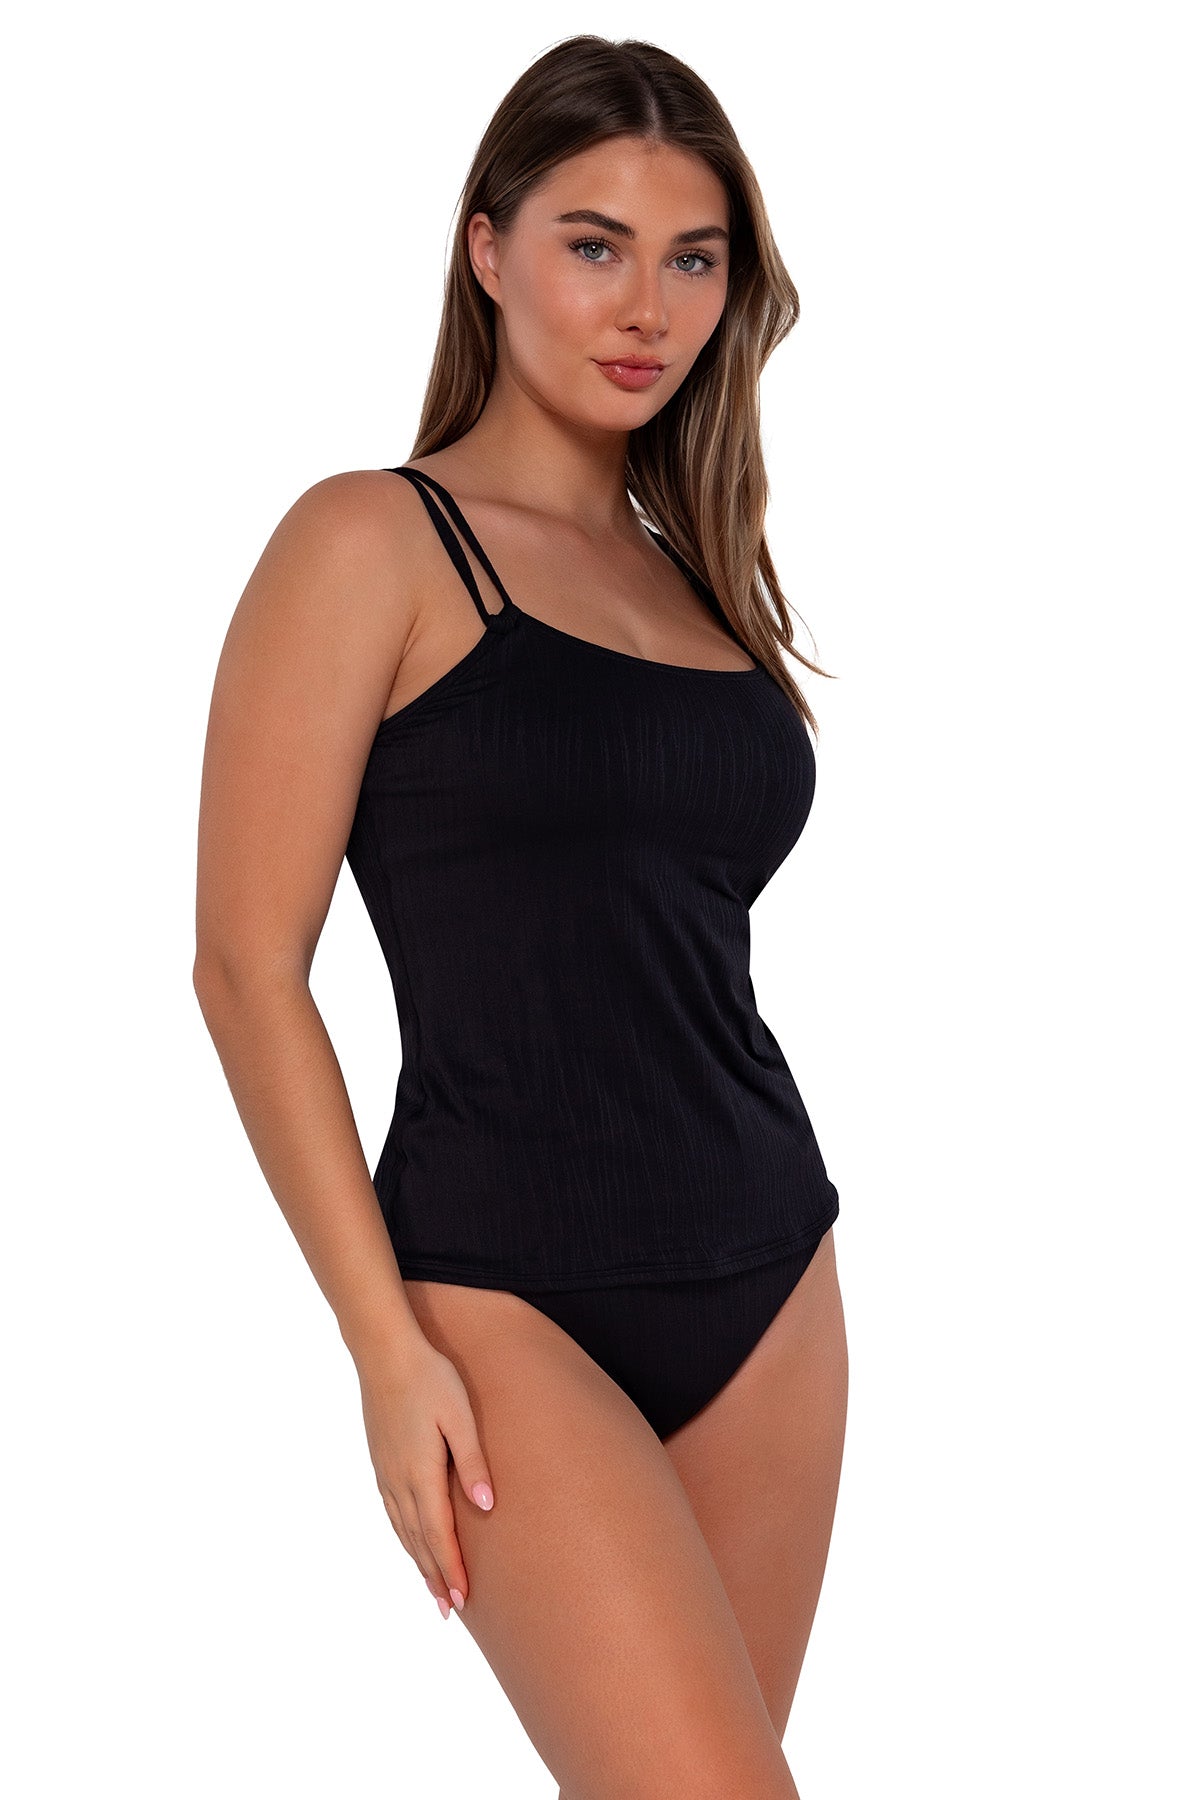 Side pose #1 of Taylor wearing Sunsets Black Seagrass Texture Taylor Tankini Top with matching Annie High Waist bikini